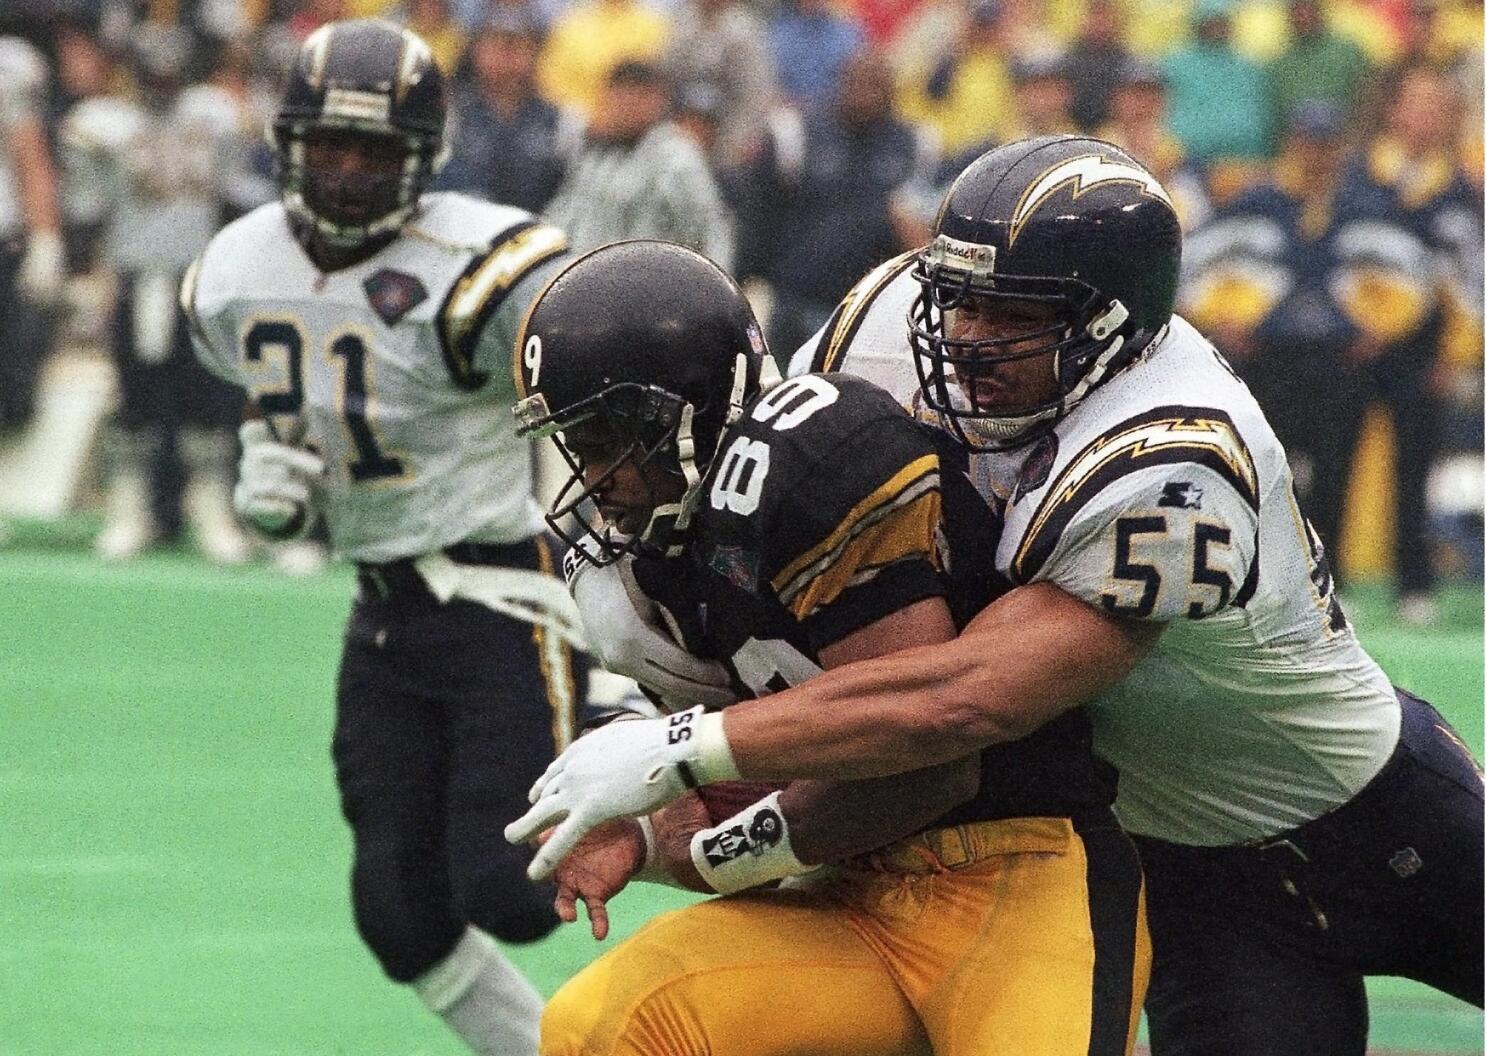 Junior Seau quote: The Super Bowl is a game. Life is for real